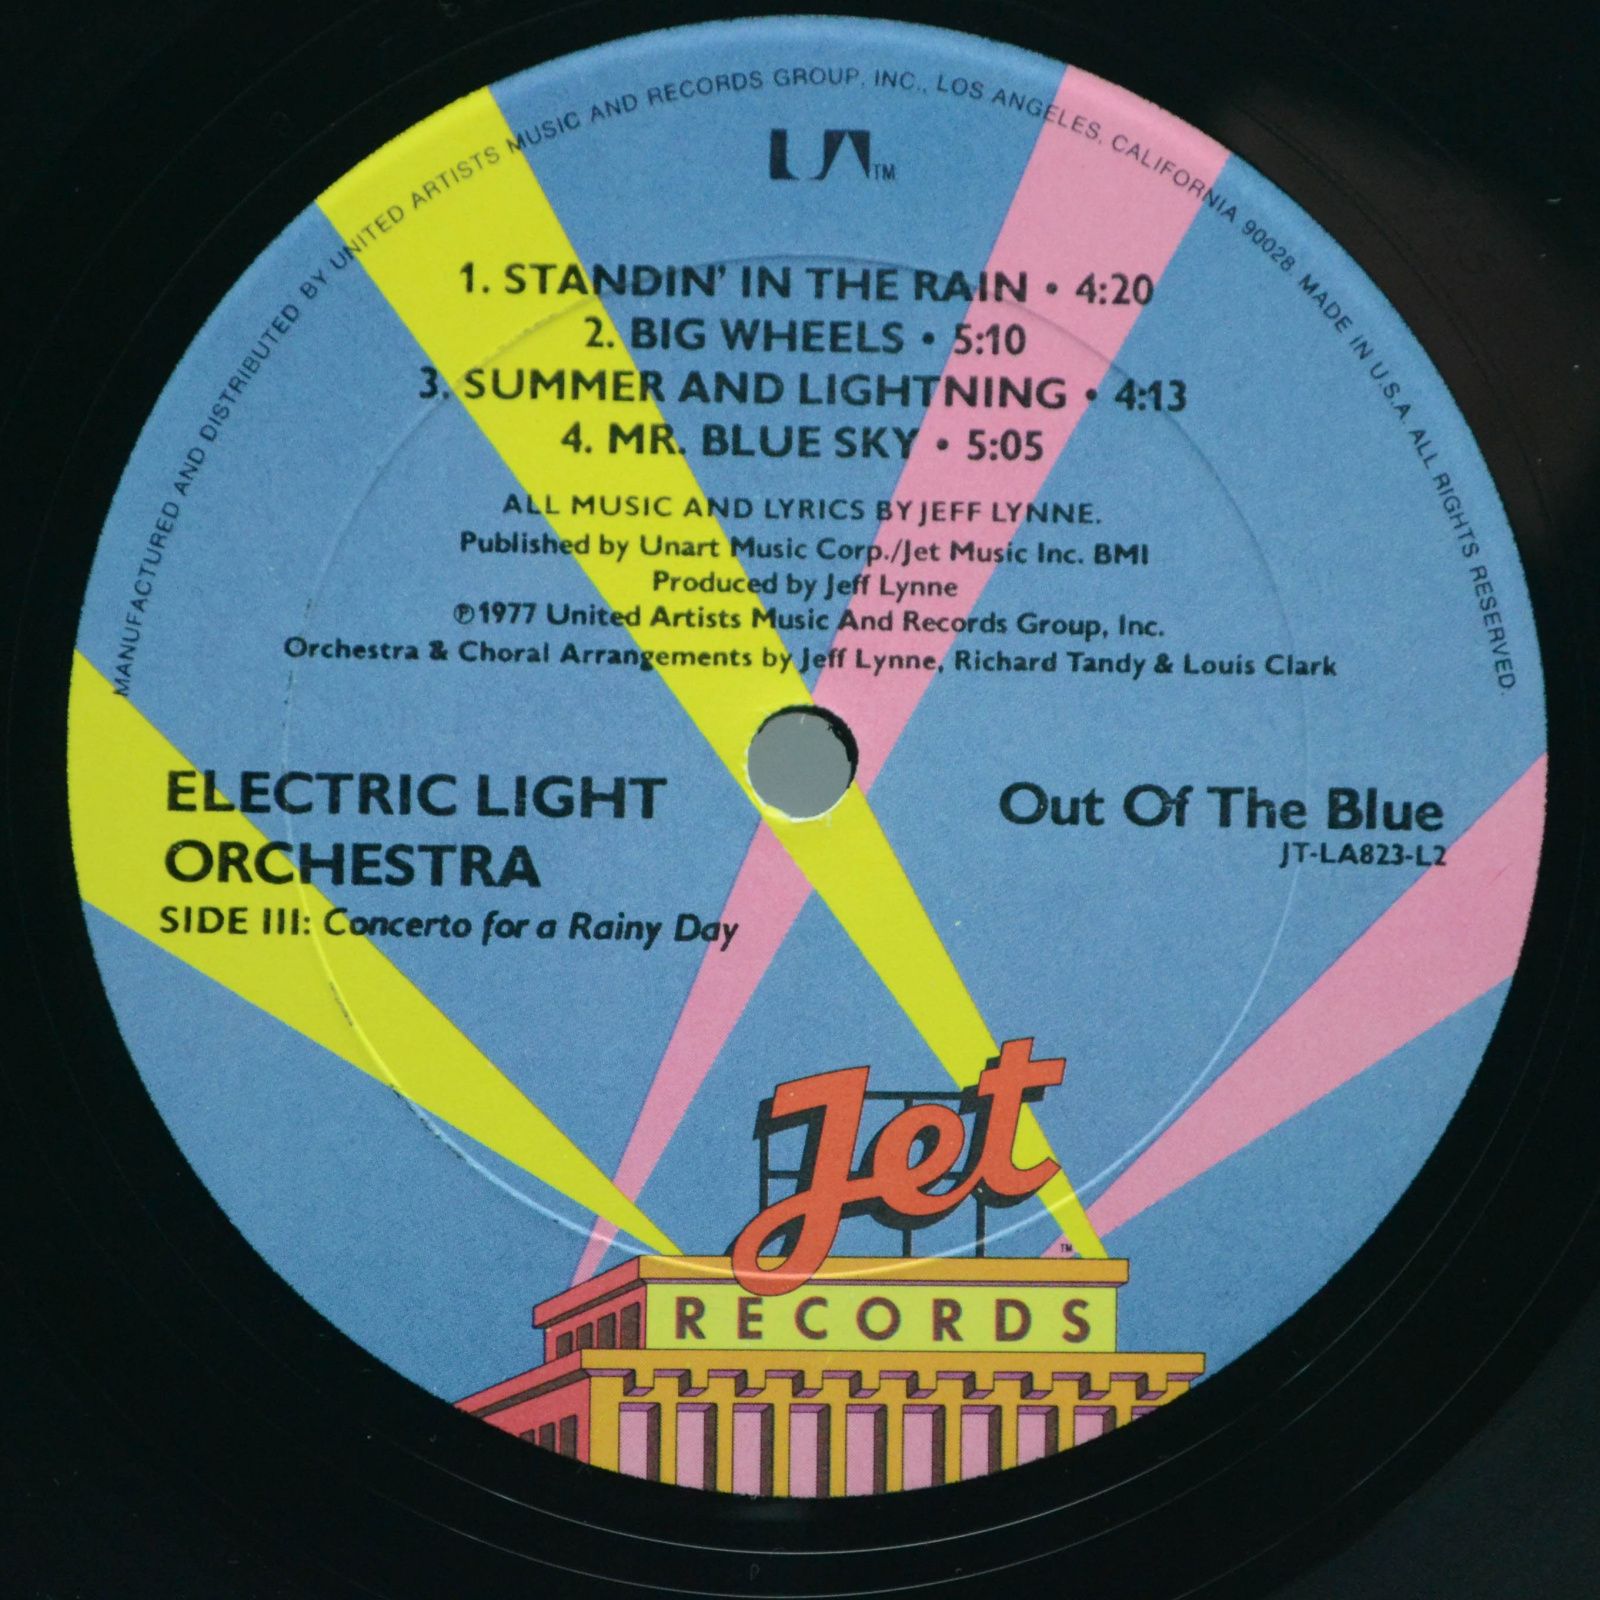 Electric Light Orchestra — Out Of The Blue (2LP, USA), 1977